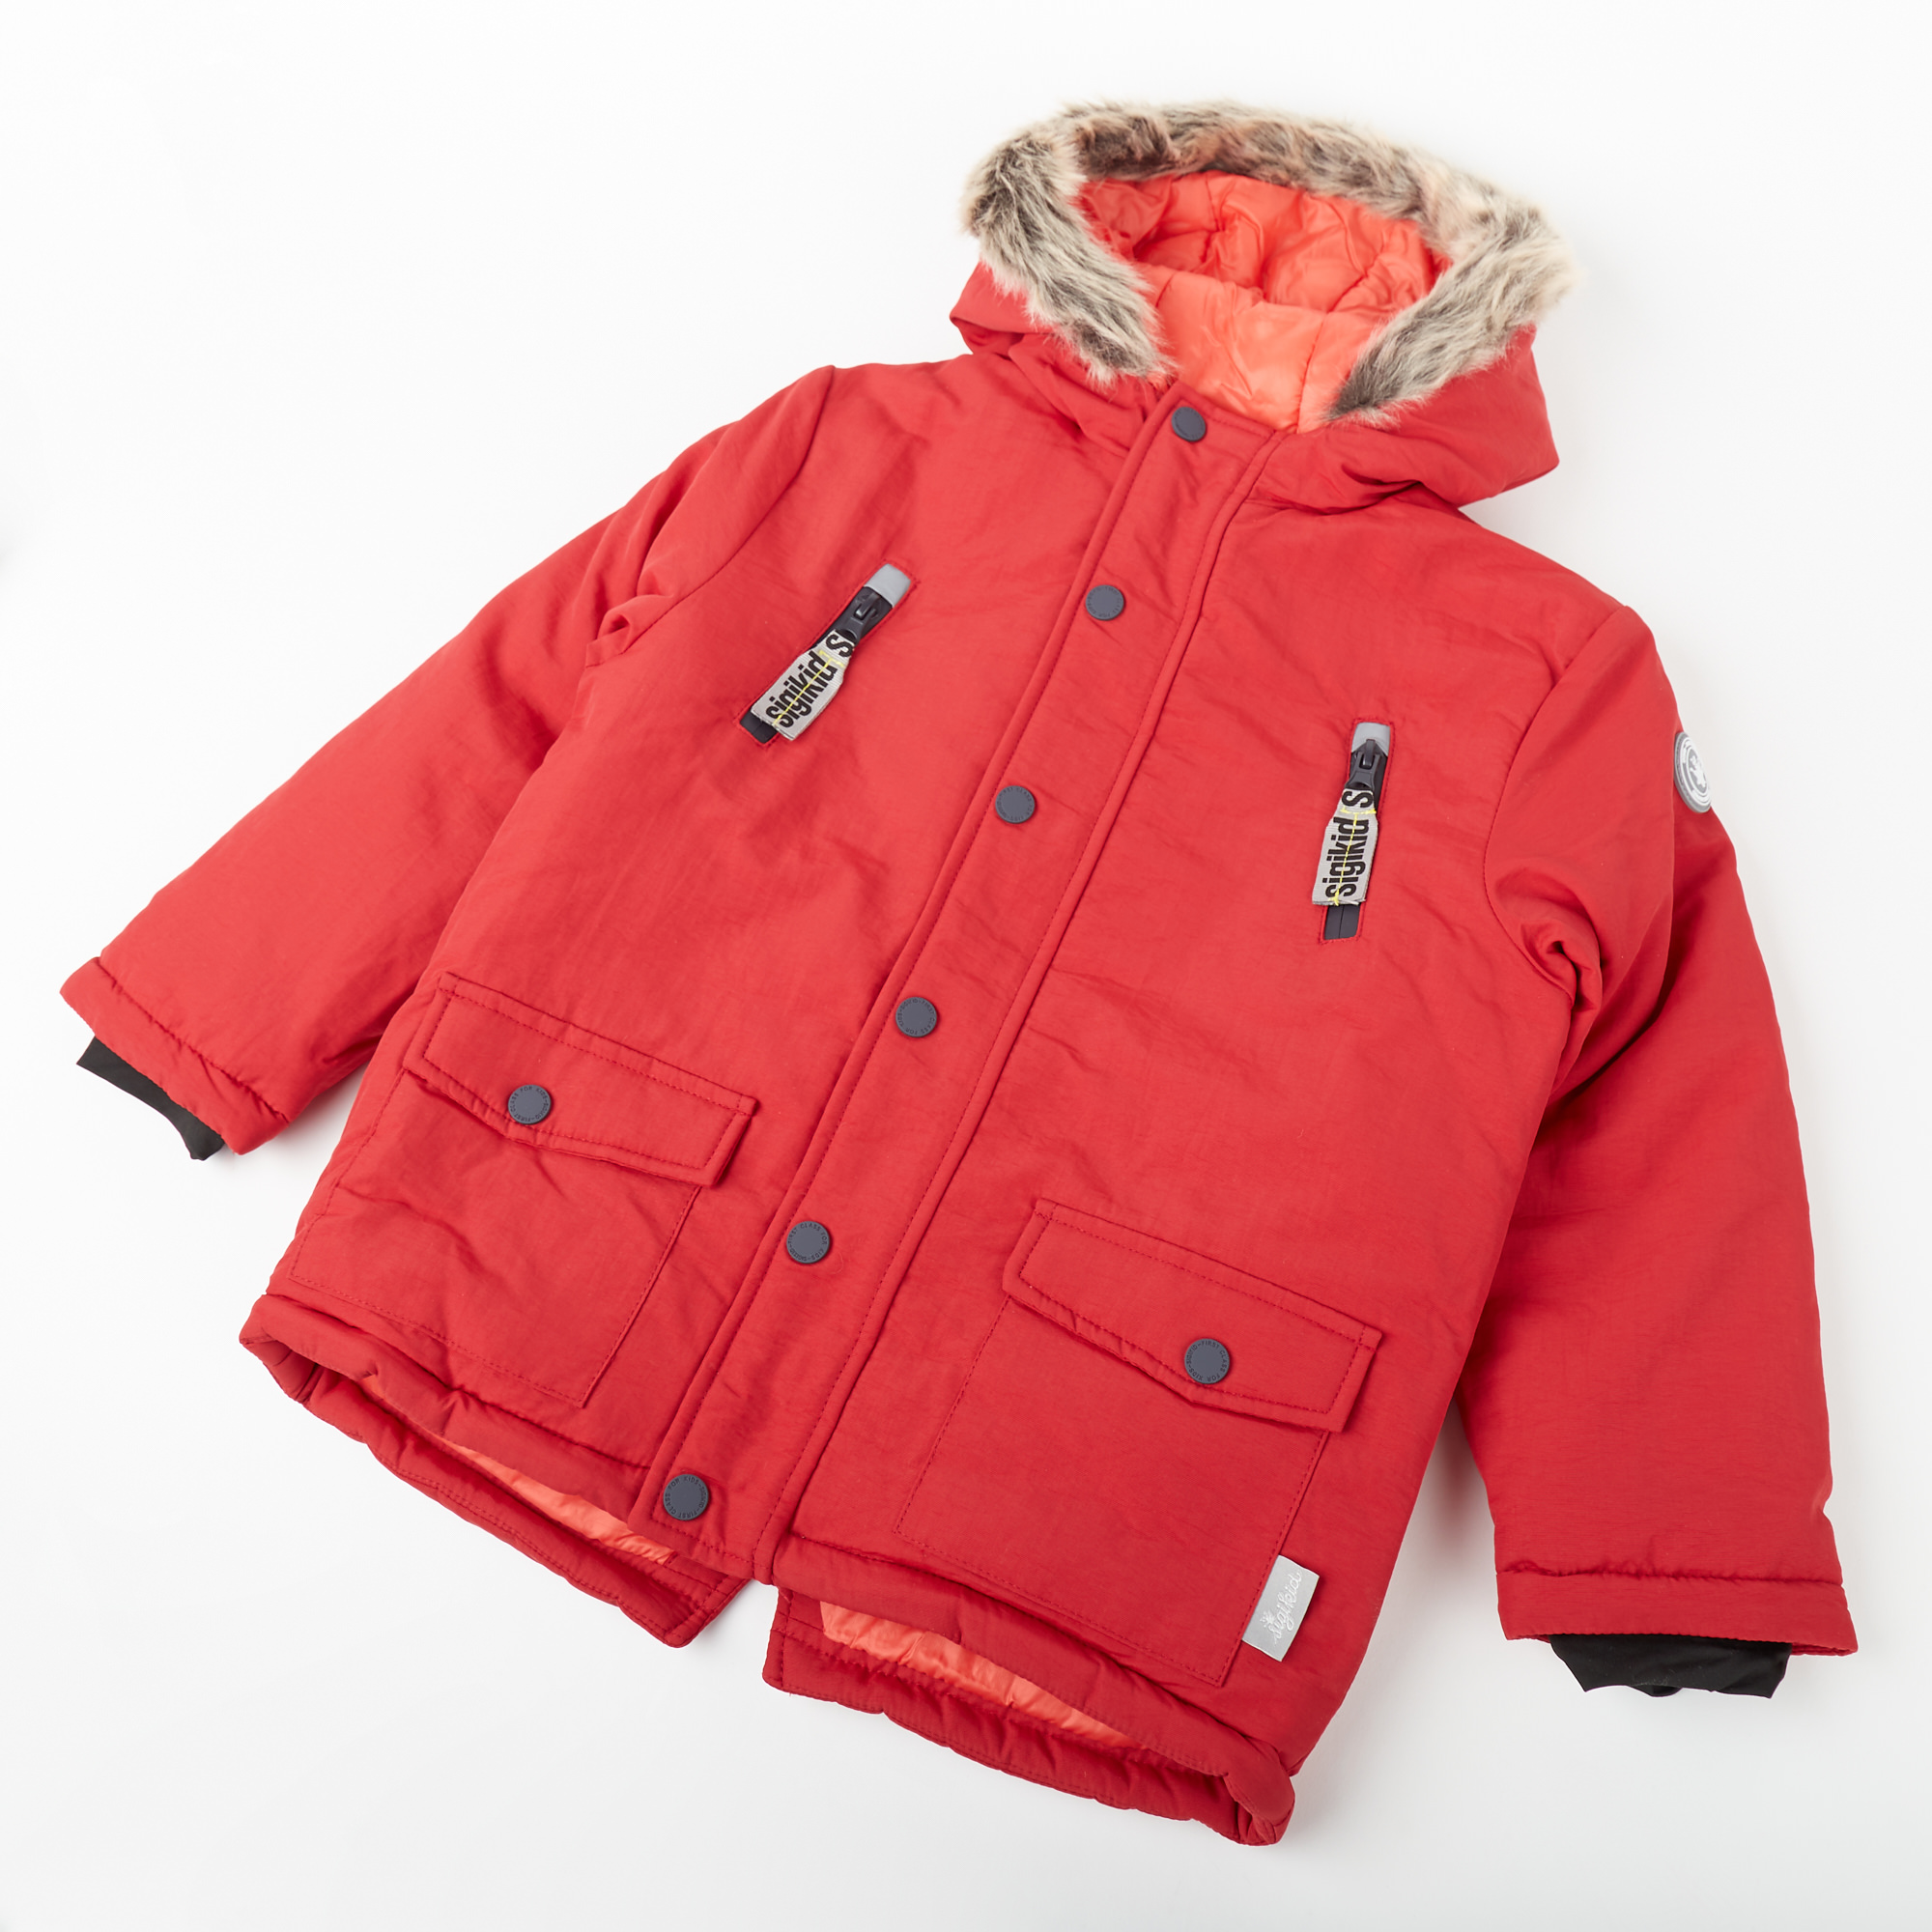 Insulated hooded winter jacket, red, for babies and toddlers